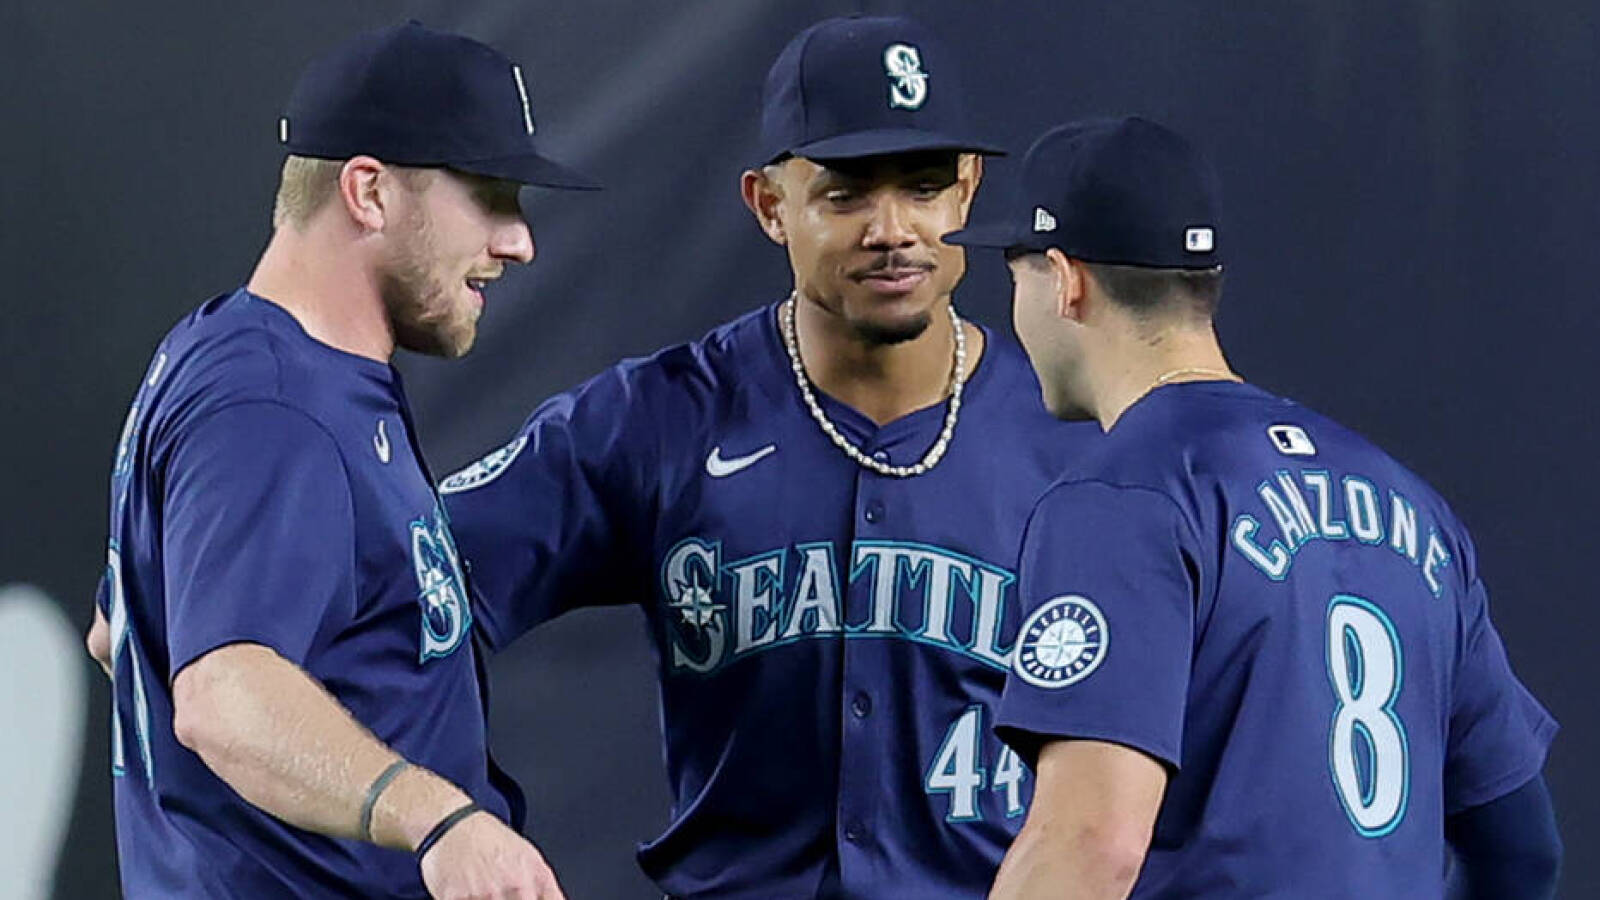 Watch: Mariners stun Yankees with improbable ninth-inning rally